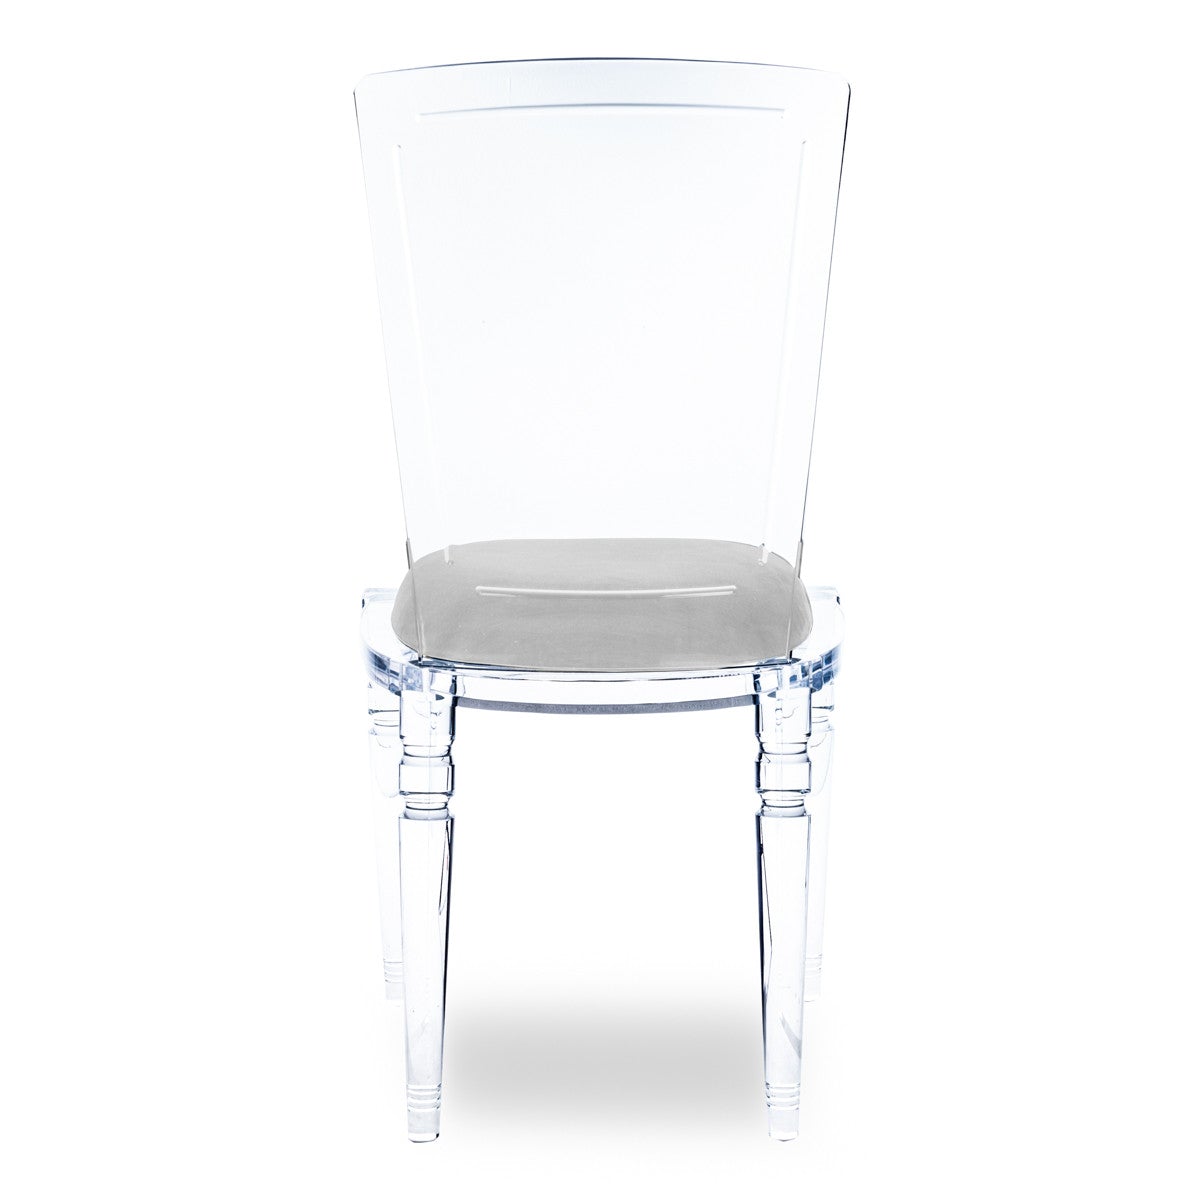 Juliette Chair Armless Lucite Chairs With Padded Seat Modshop